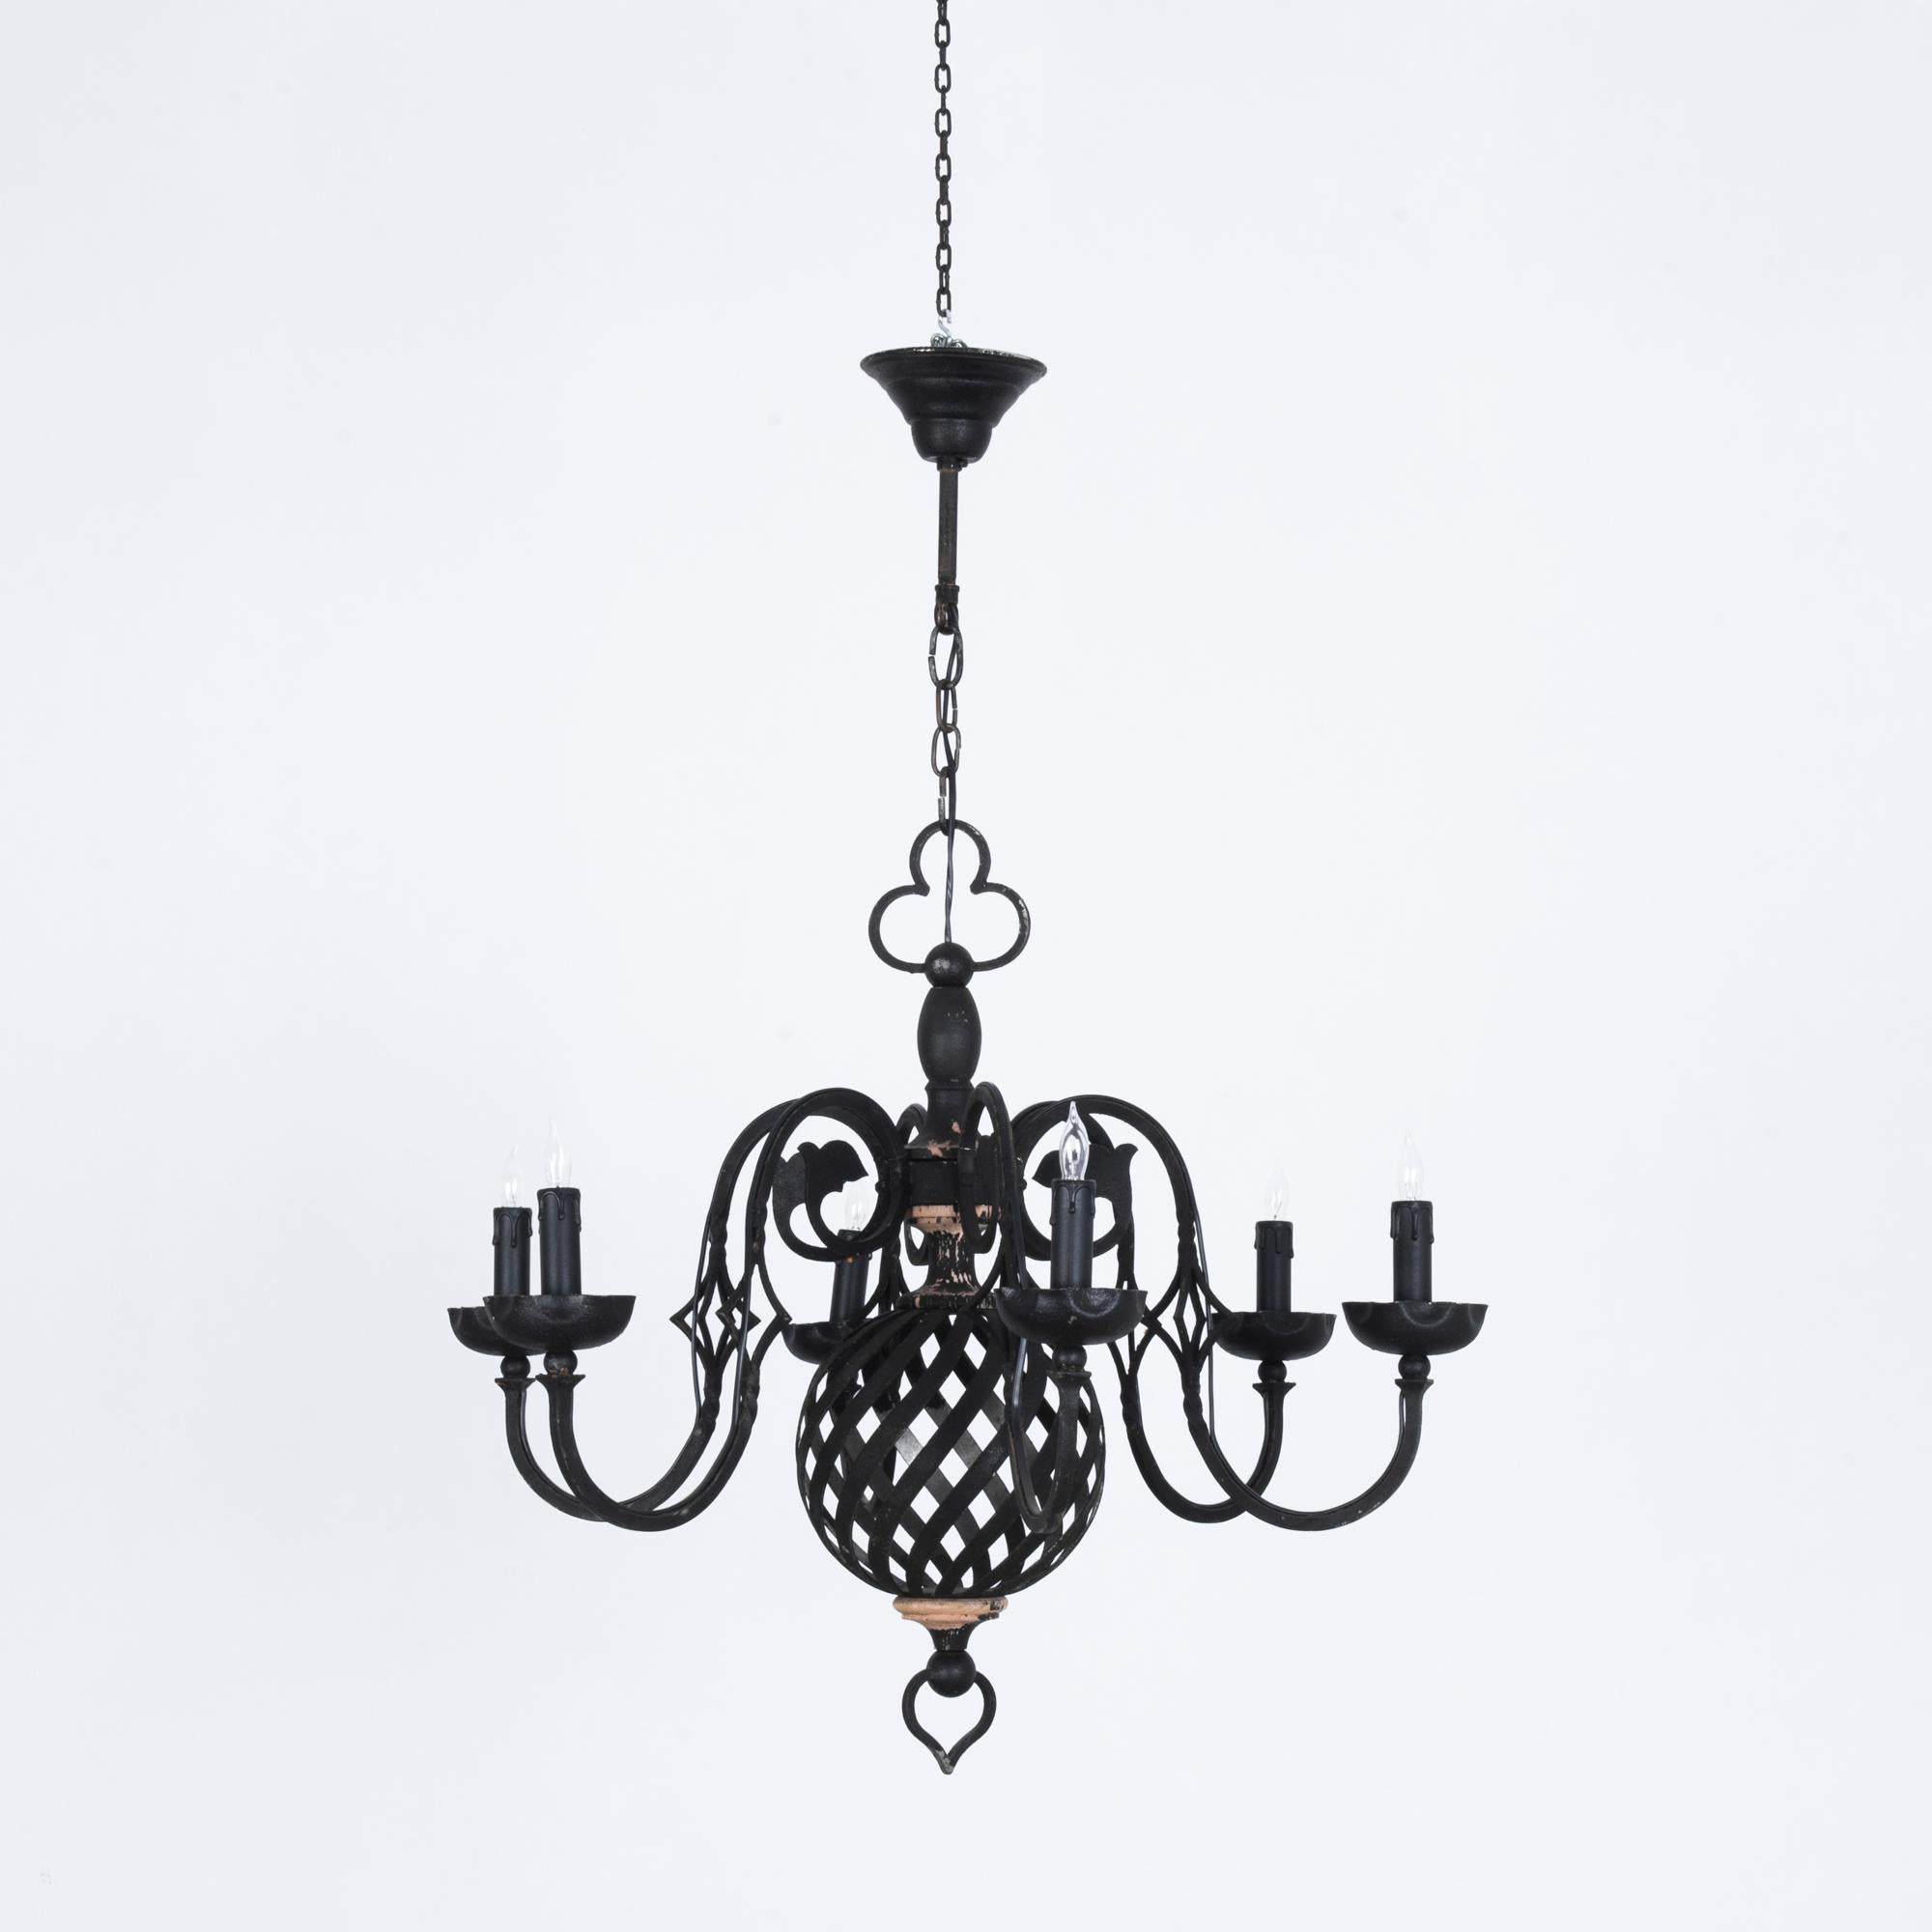 This chandelier from 1960s France is made of black metal. An elaborate design features six cascading arms which support candelabra bulbs. Beneath, an orb of undulating metal bars creates a hypnotic visual effect. An ornate and dramatic piece, fully